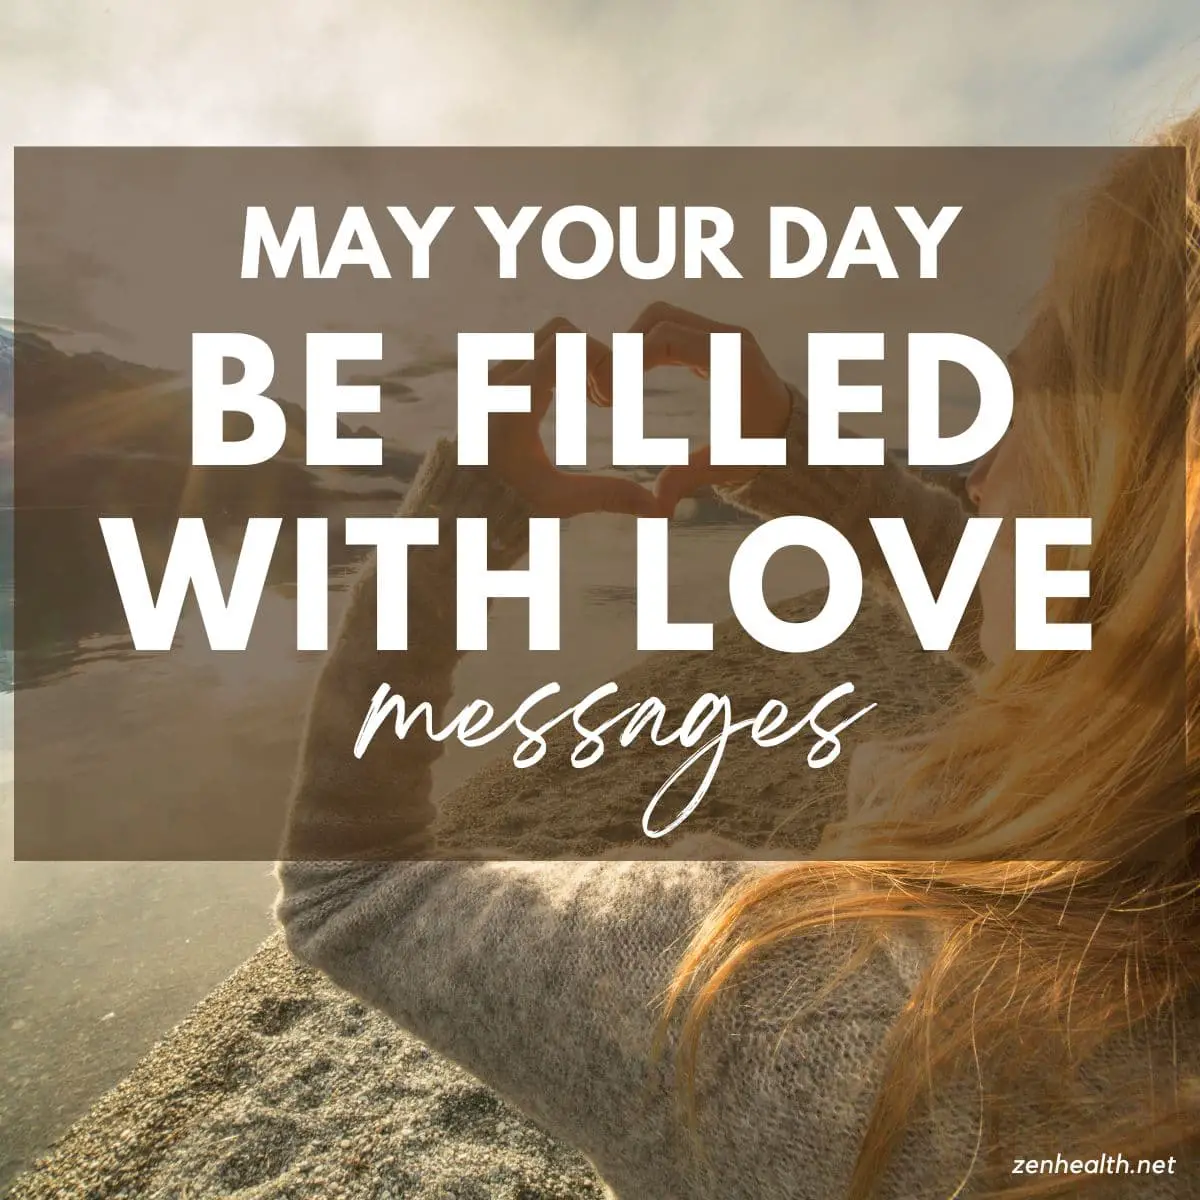 may your day be filled with love messages text overlay on a blonde woman holding her palms in the shape of a heart